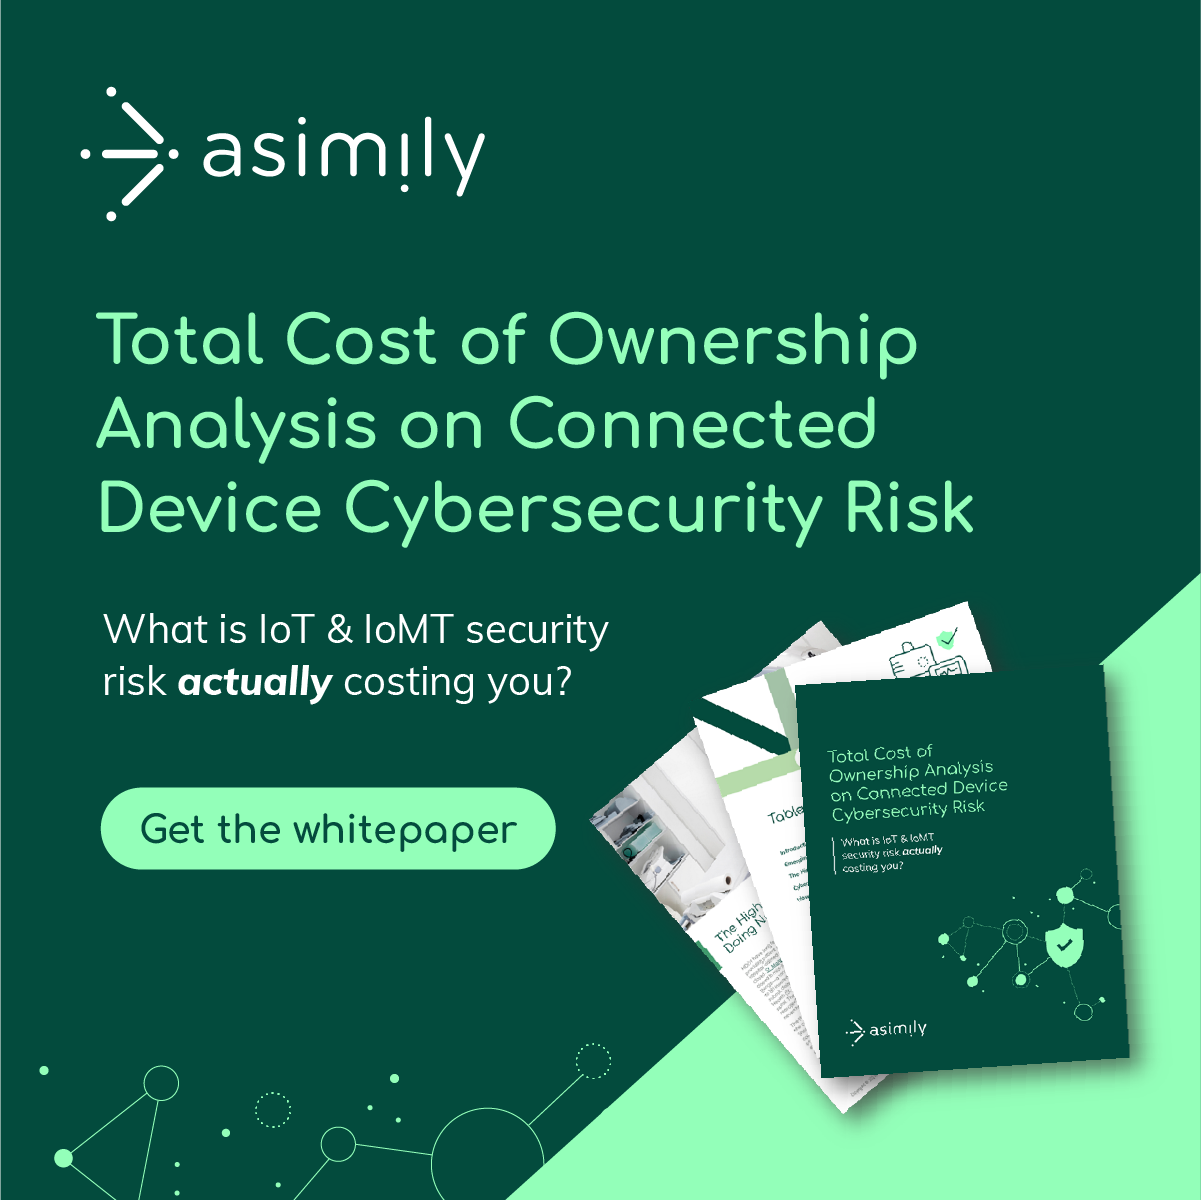 Total Cost of Ownership Analysis on Connected Device Cybersecurity Risk Whitepaper